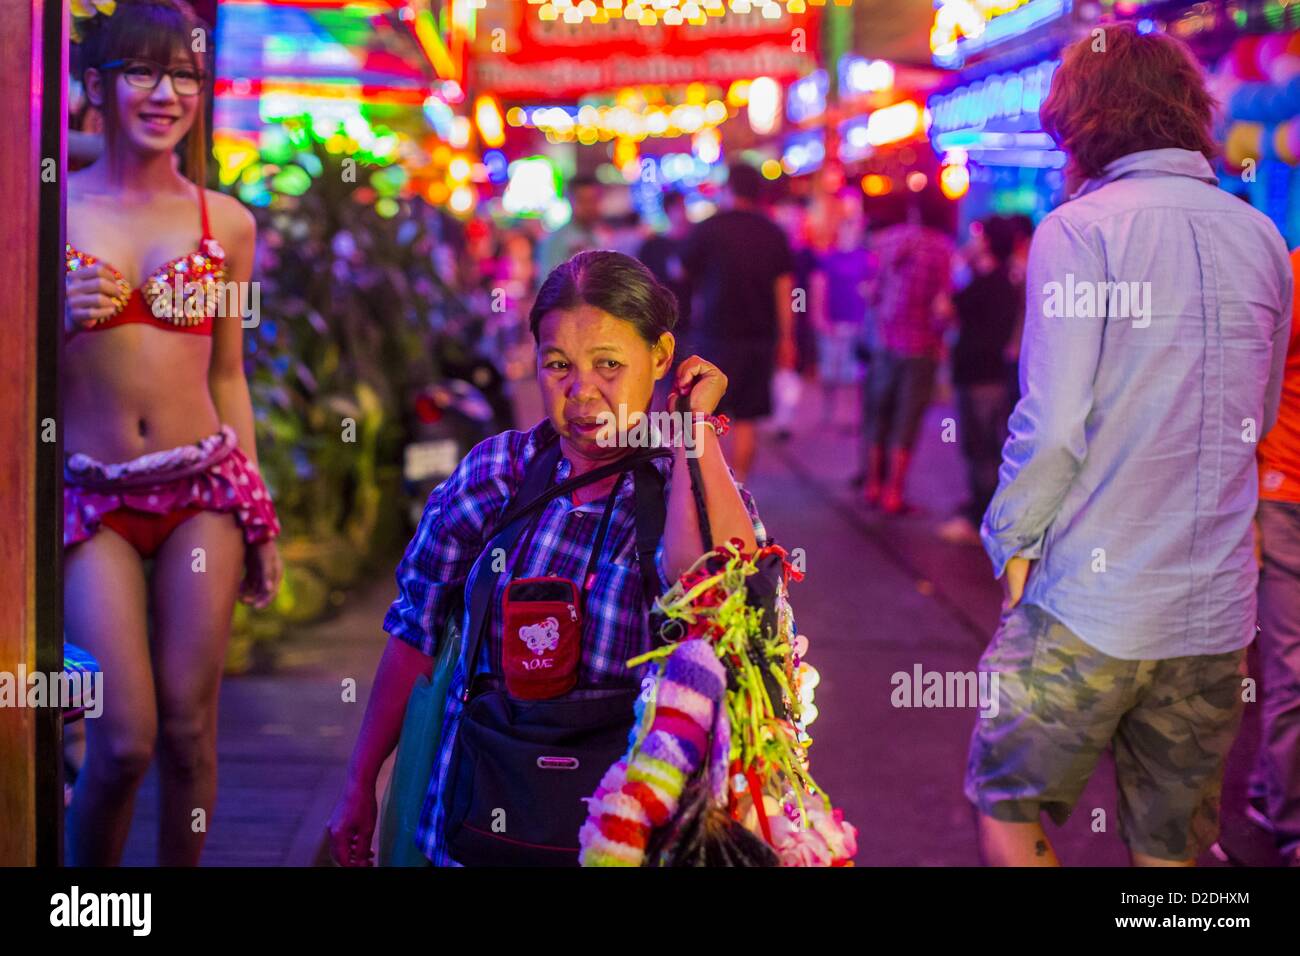 Jan. 12, 2013 - Bangkok, Thailand - A woman who sells garters to workers in the red light district of Soi Cowboy walks down the street between ''Ladyboy'' entertainers and tourists. In Thai, the ladyboys are called kathoey. Many work in the entertainment and night life sectors of the Thai economy.  Prostitution in Thailand is illegal, although in practice it is tolerated and partly regulated. Prostitution is practiced openly throughout the country. The number of prostitutes is difficult to determine, estimates vary widely. Since the Vietnam War, Thailand has gained international notoriety amon Stock Photo